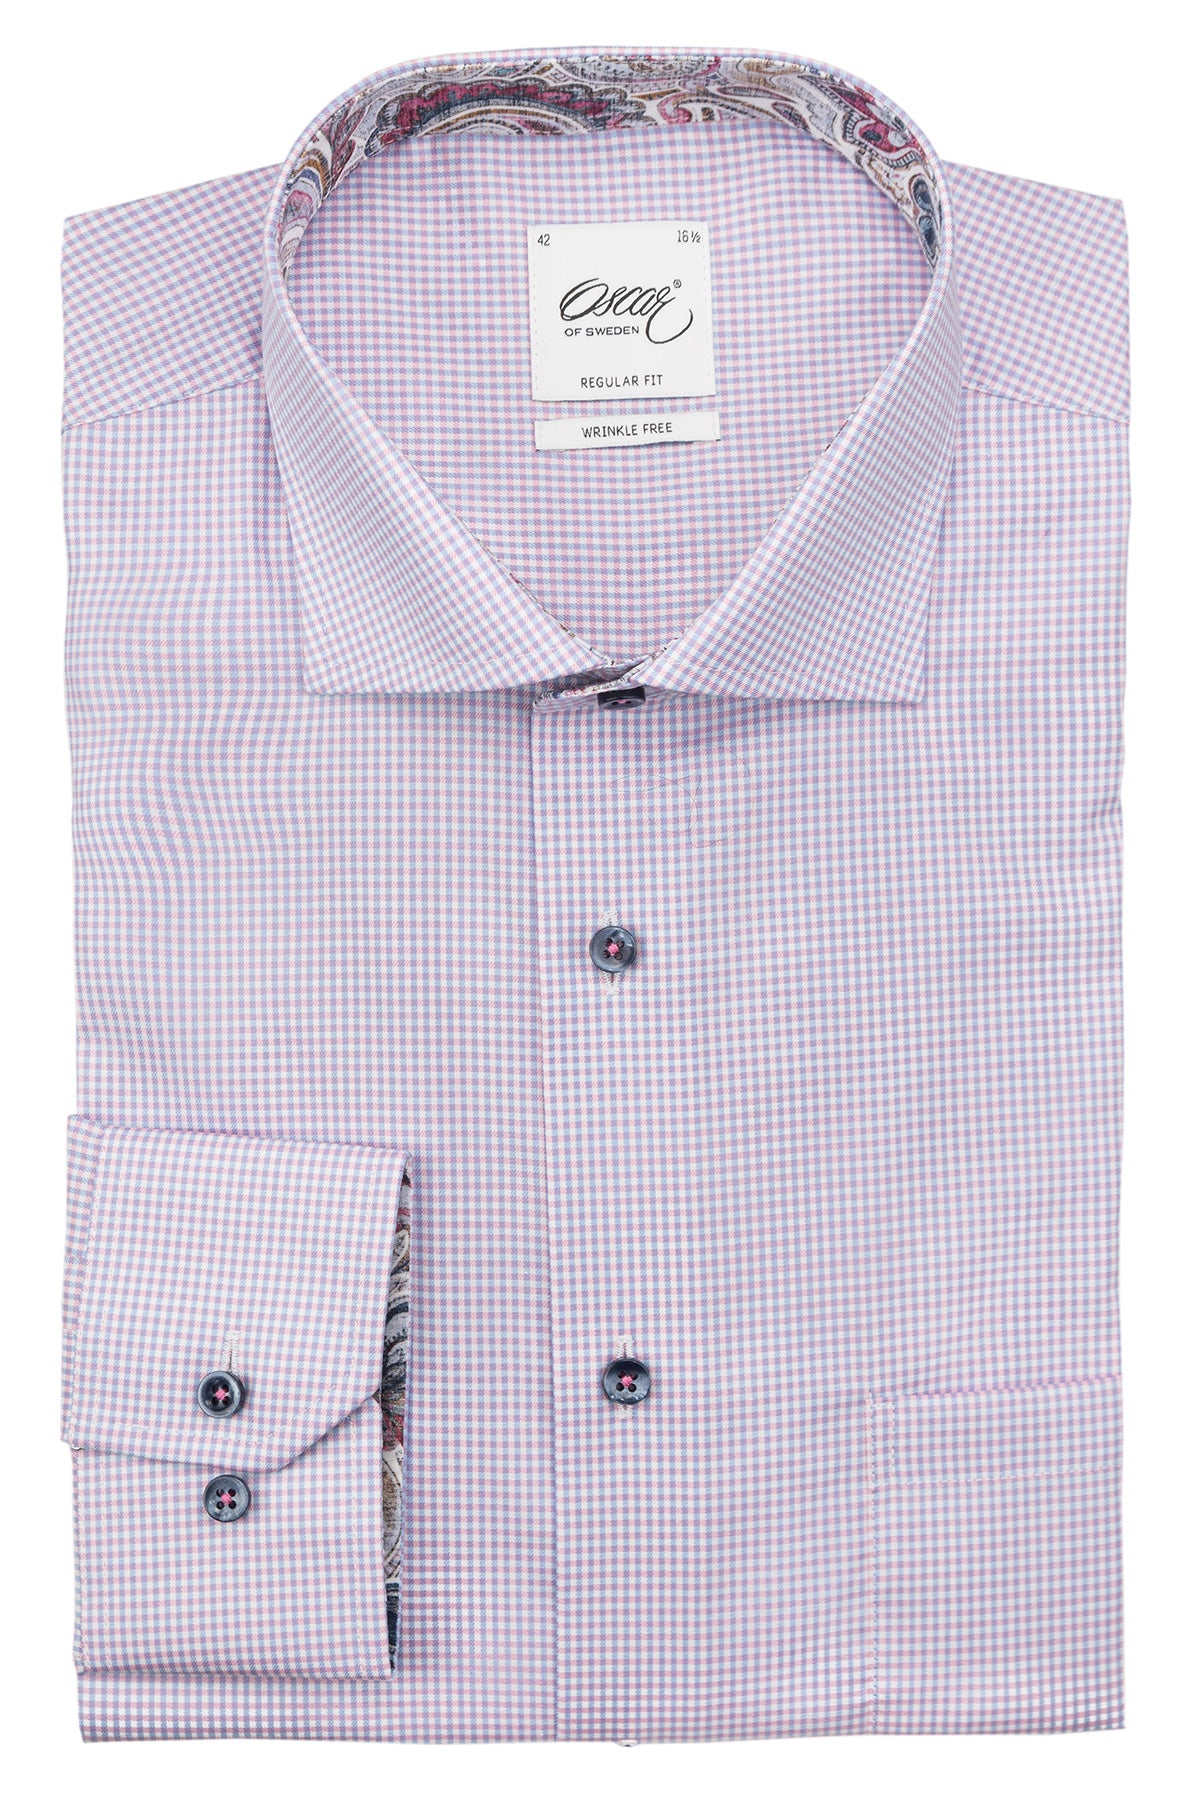 Pink checked extra long sleeve regular fit shirt with contrast details